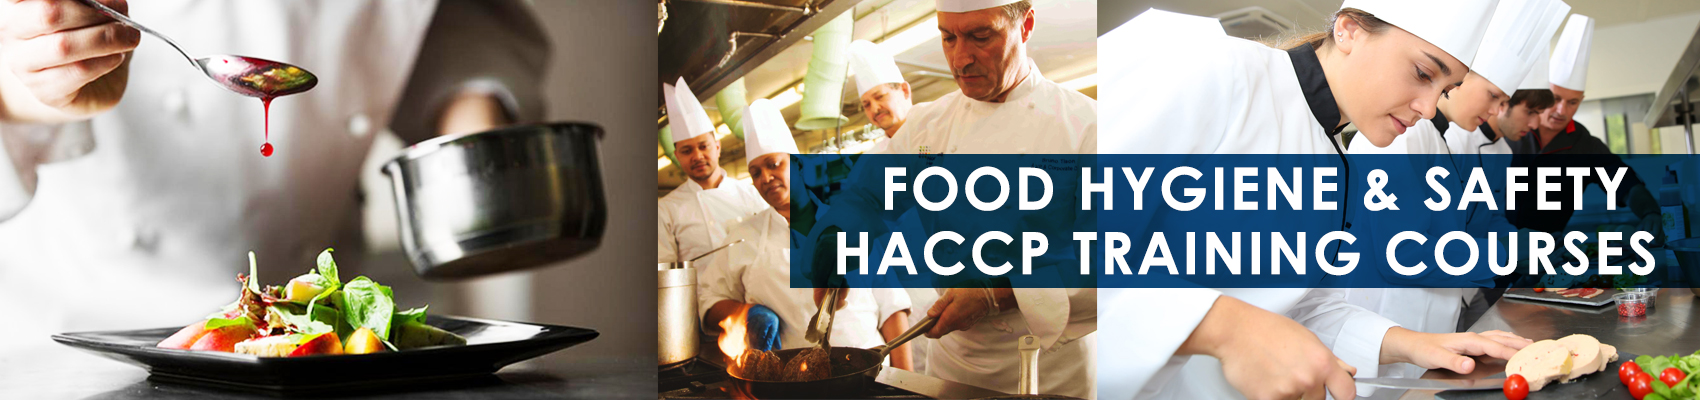 Haccp food safety jobs south africa